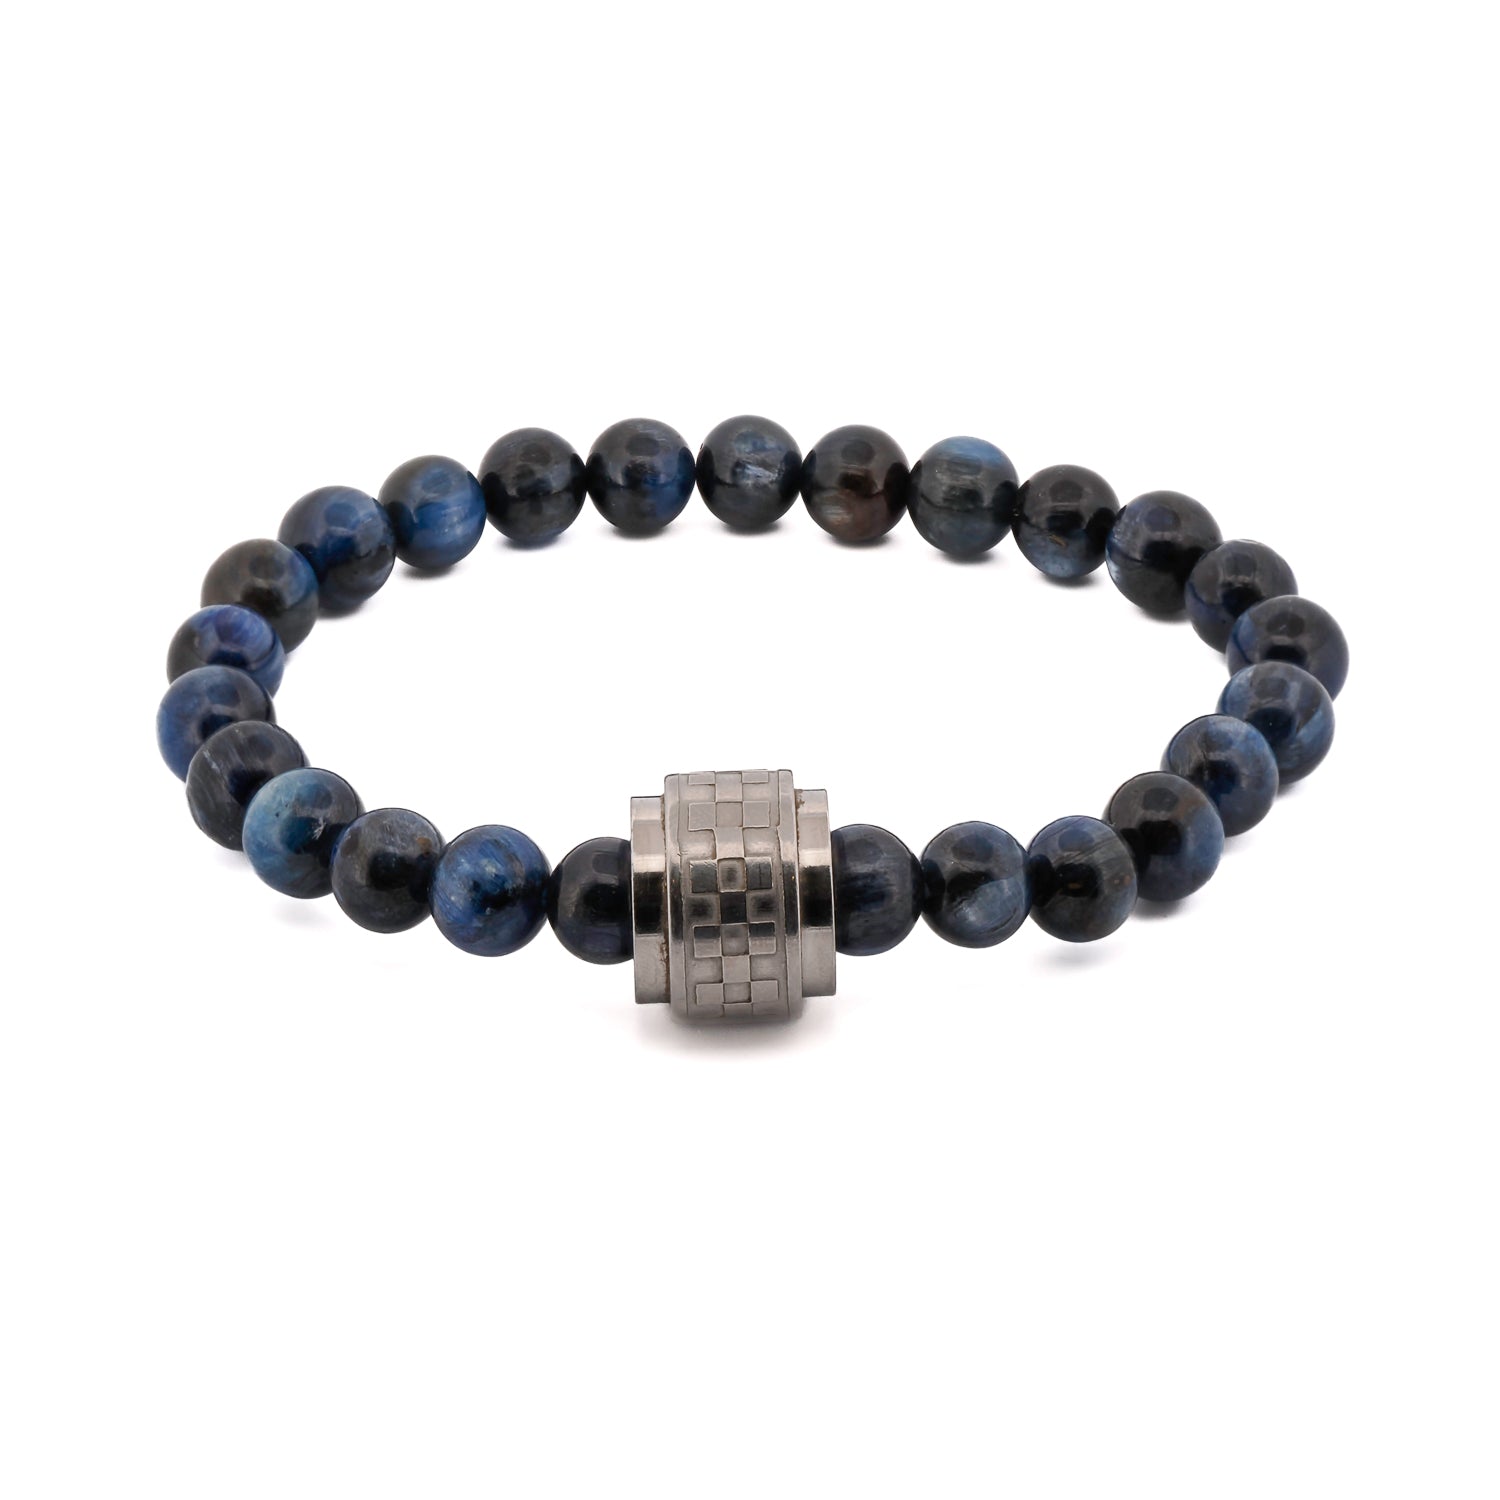 Blue Tiger's Eye Beaded Silver Amour Bracelet featuring 8mm blue tiger's eye stone beads and a stainless steel Amour bead